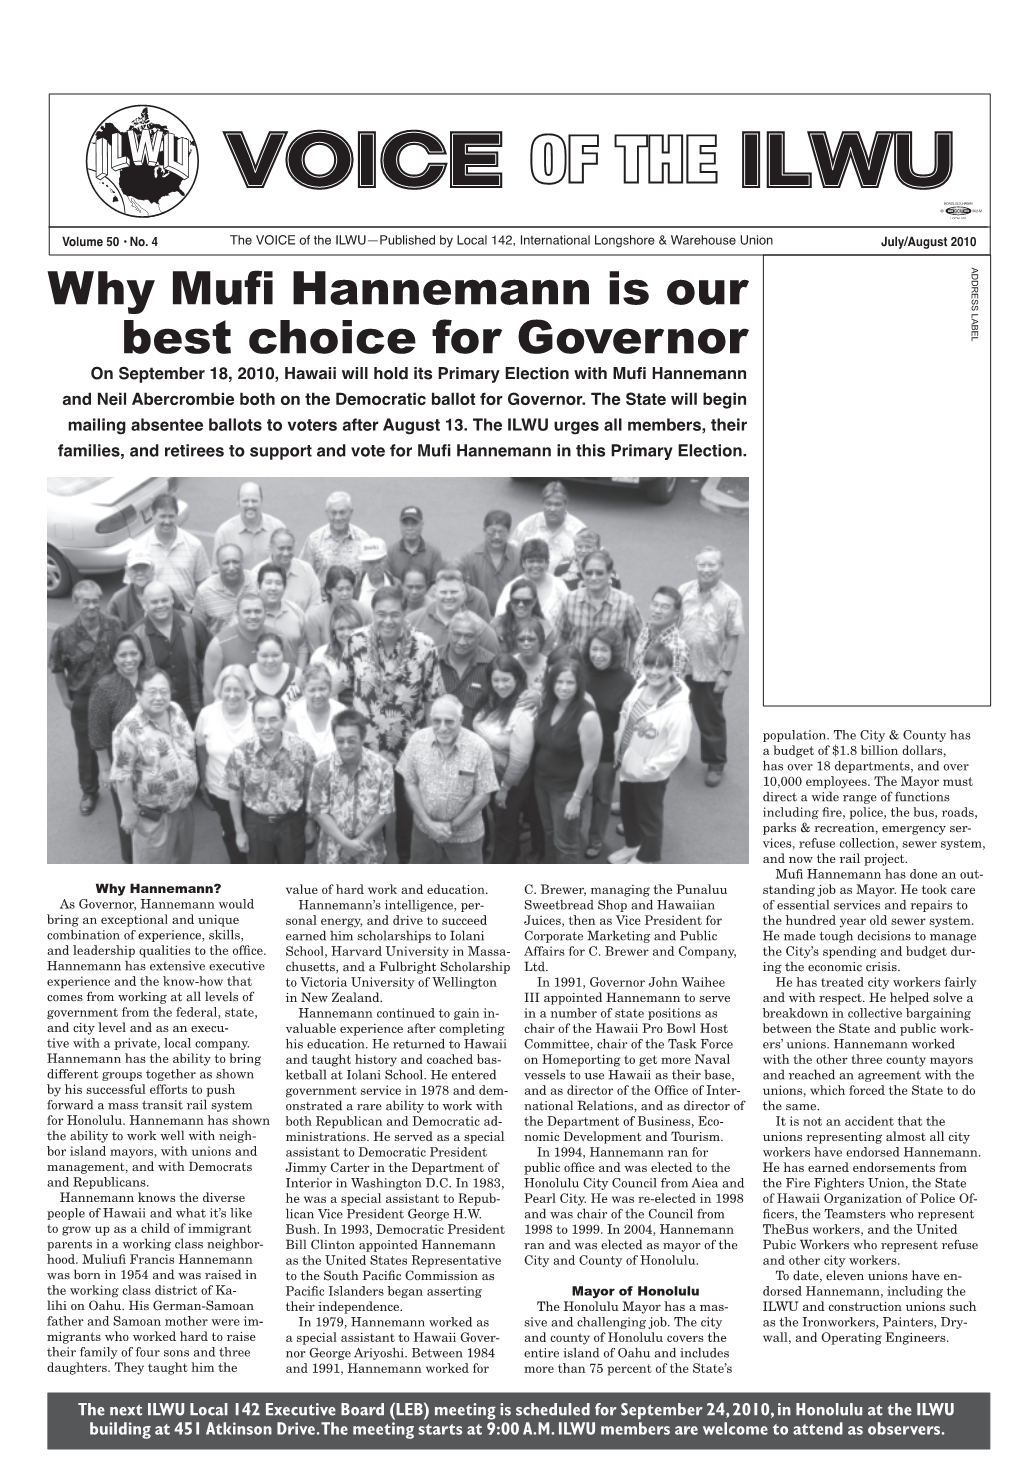 Why Mufi Hannemann Is Our Best Choice for Governor